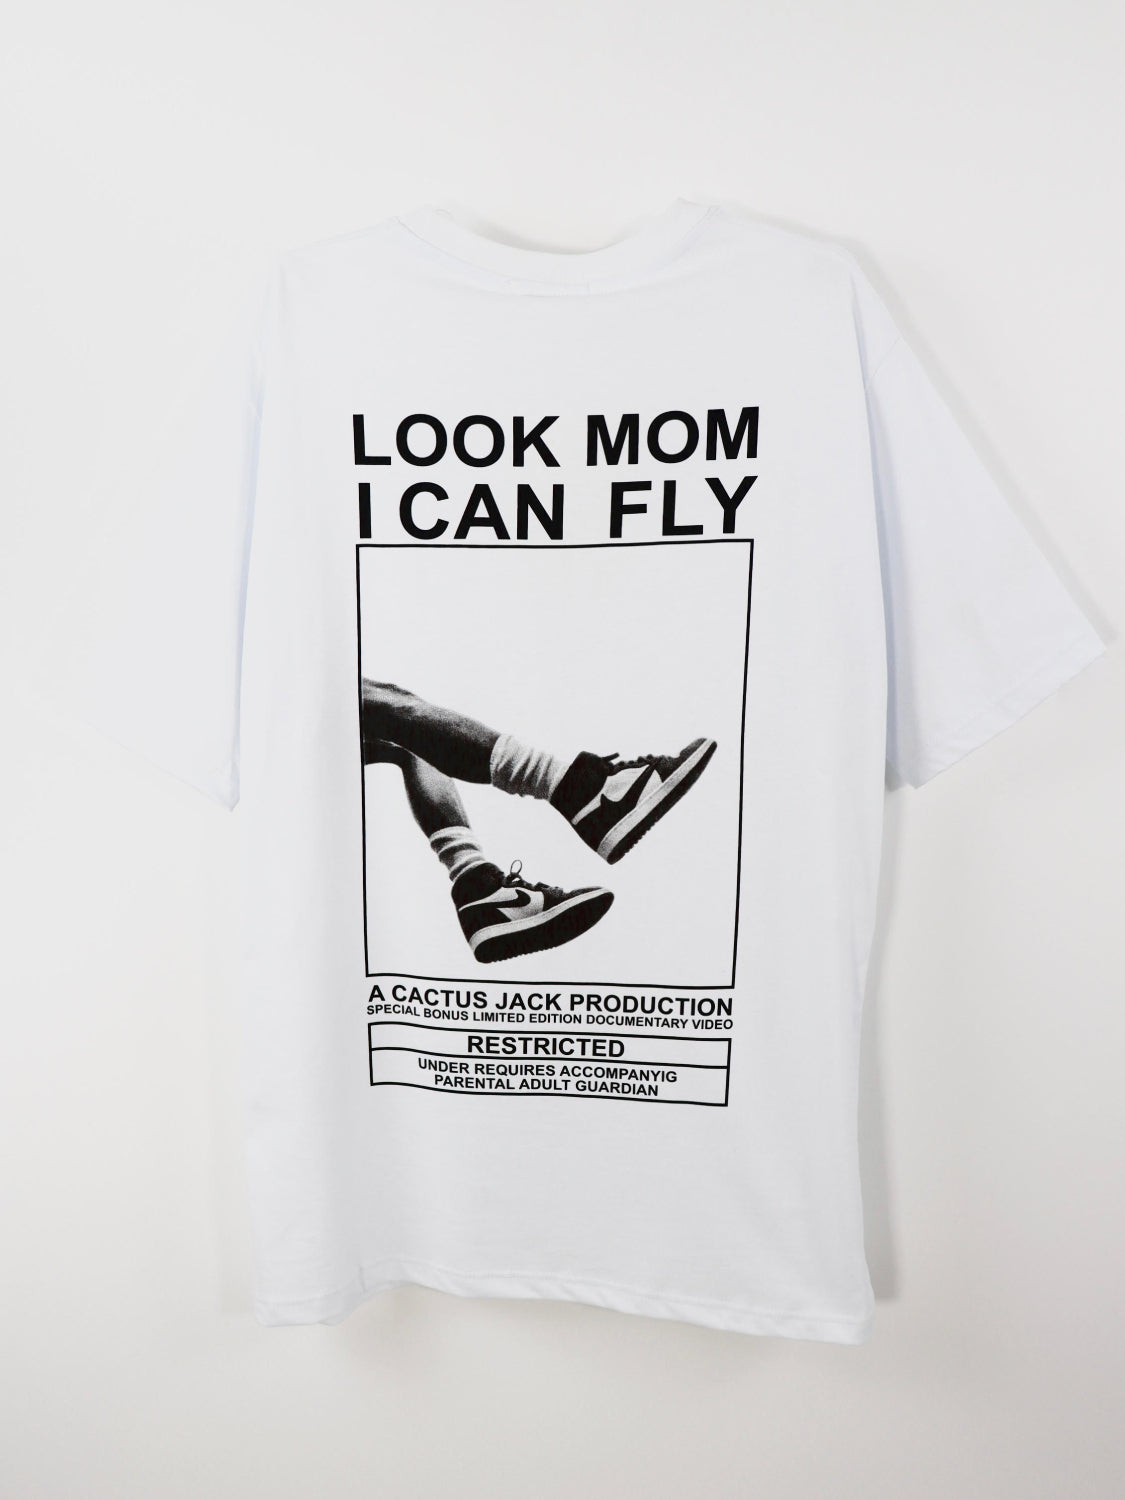 T-SHIRT "LOOK MOM I CAN FLY" - Col. Bianco